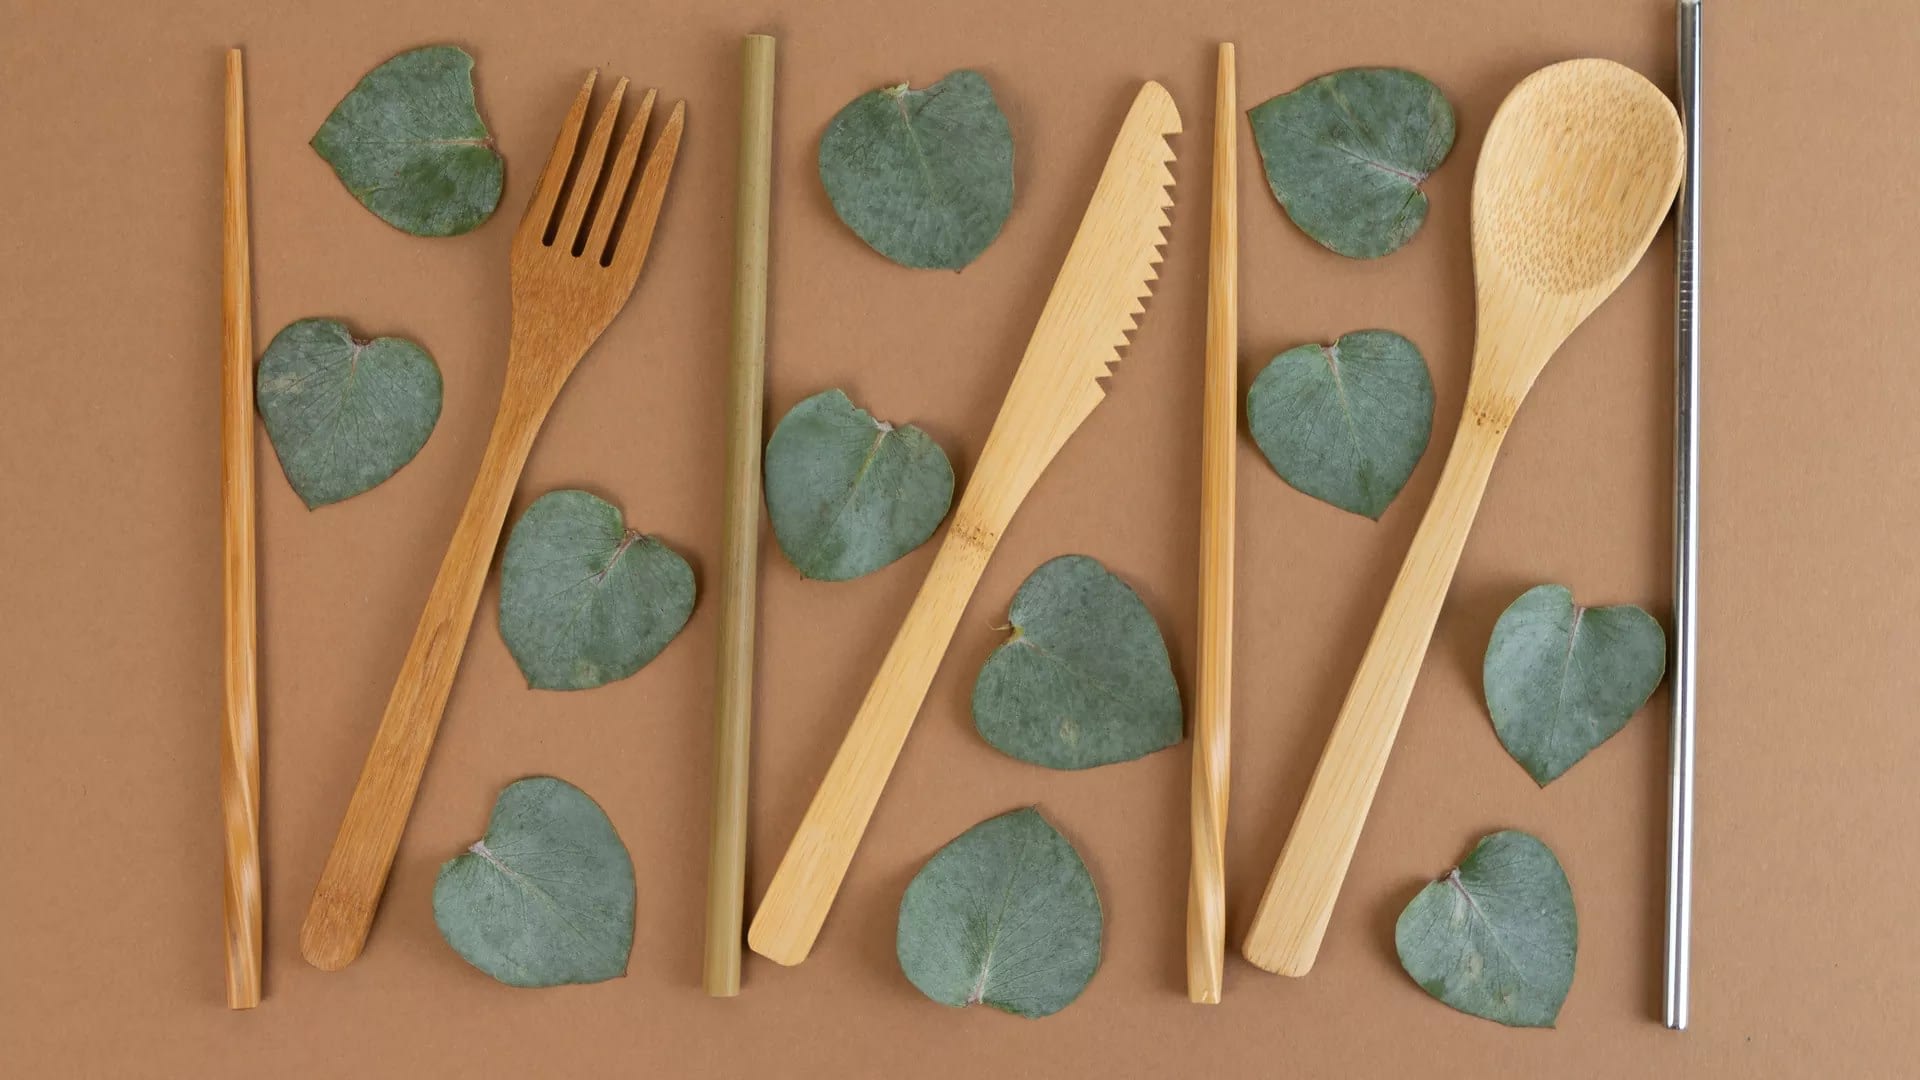 BAMBOO CUTLERY : A PERFECT ECO-FRIENDLY VALENTINE'S DAY GIFT TO YOUR SPOUSE